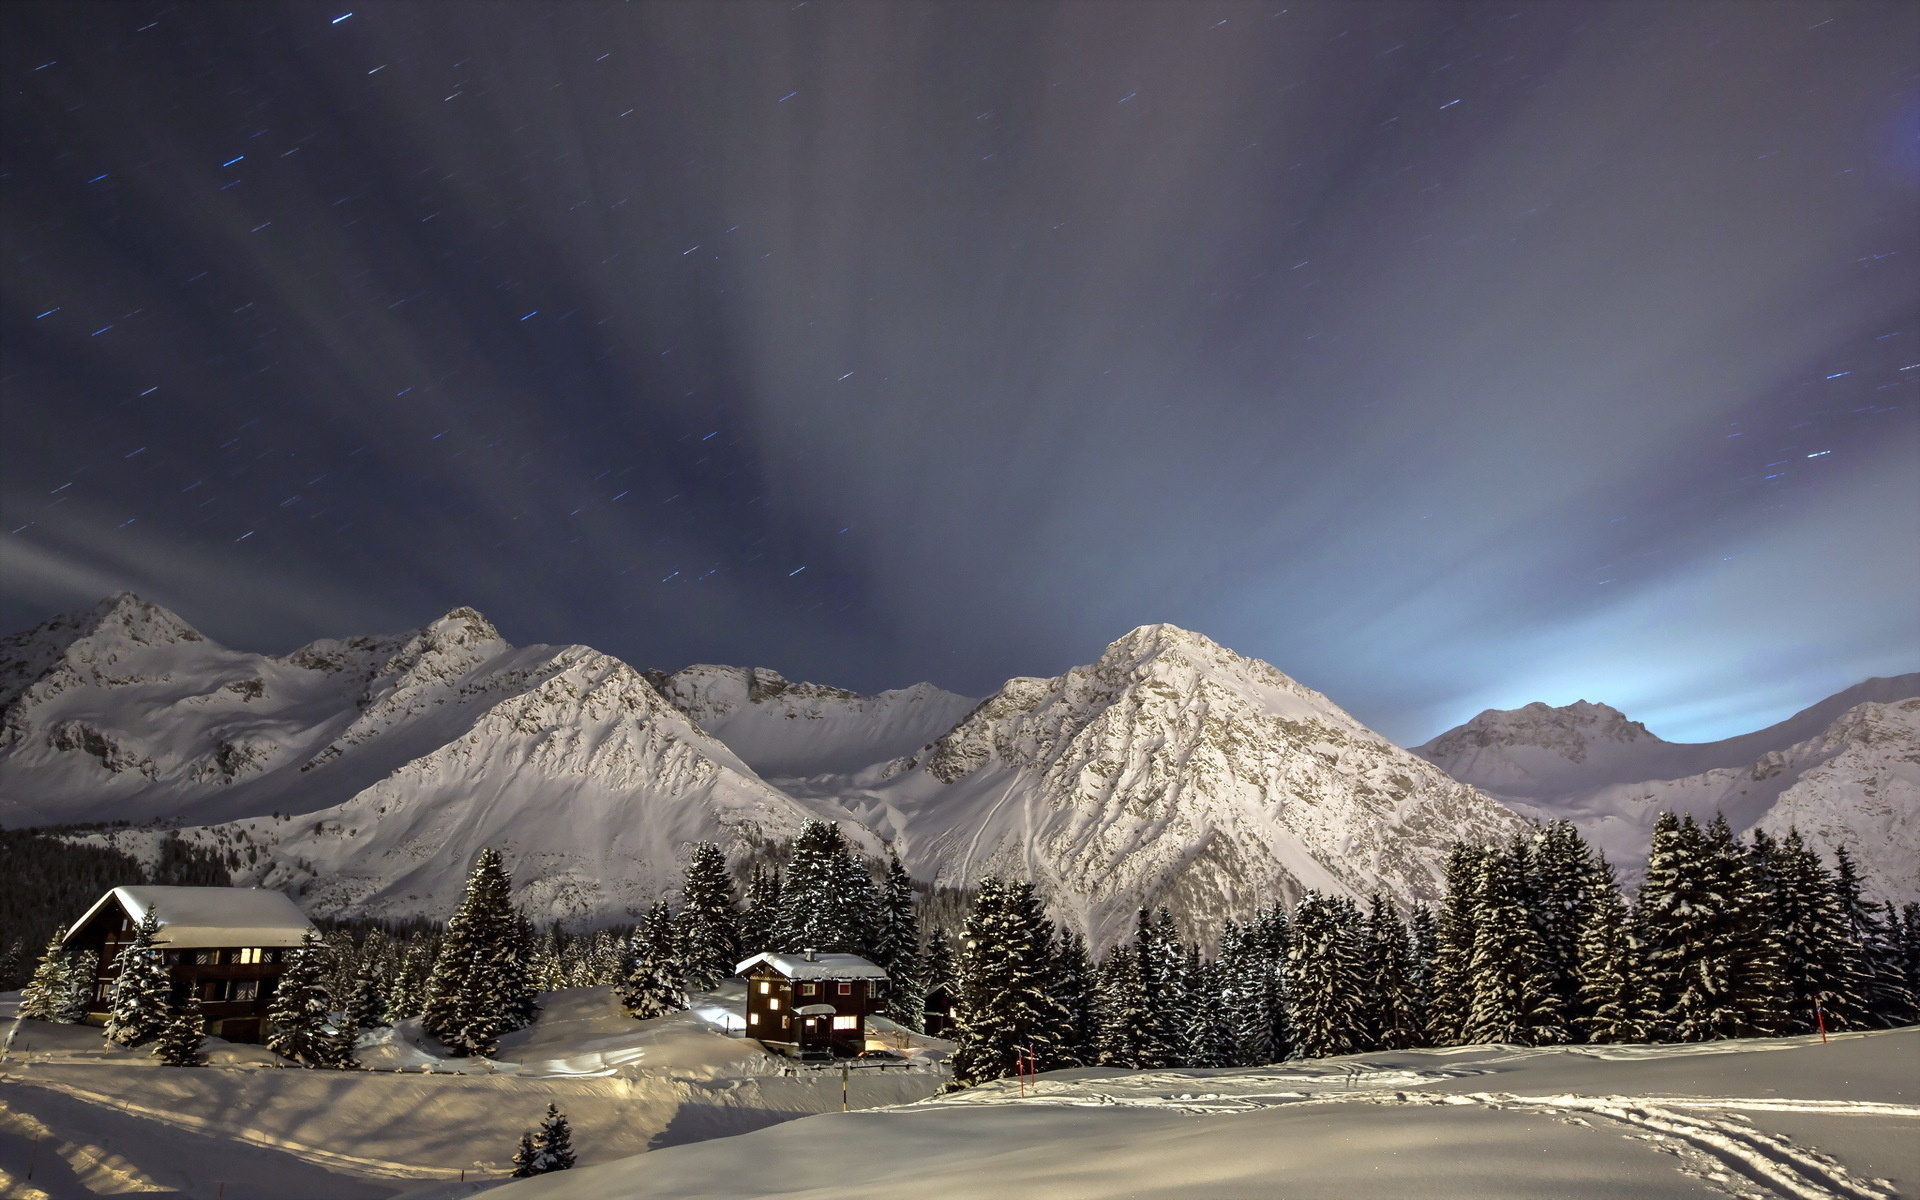 houses, Buildings, Architecture, Cabins, Nature, Landscapes, Winter, Snow, Trees, Mountains, Sky, Stars, Night, Lights, Moonlight Wallpaper